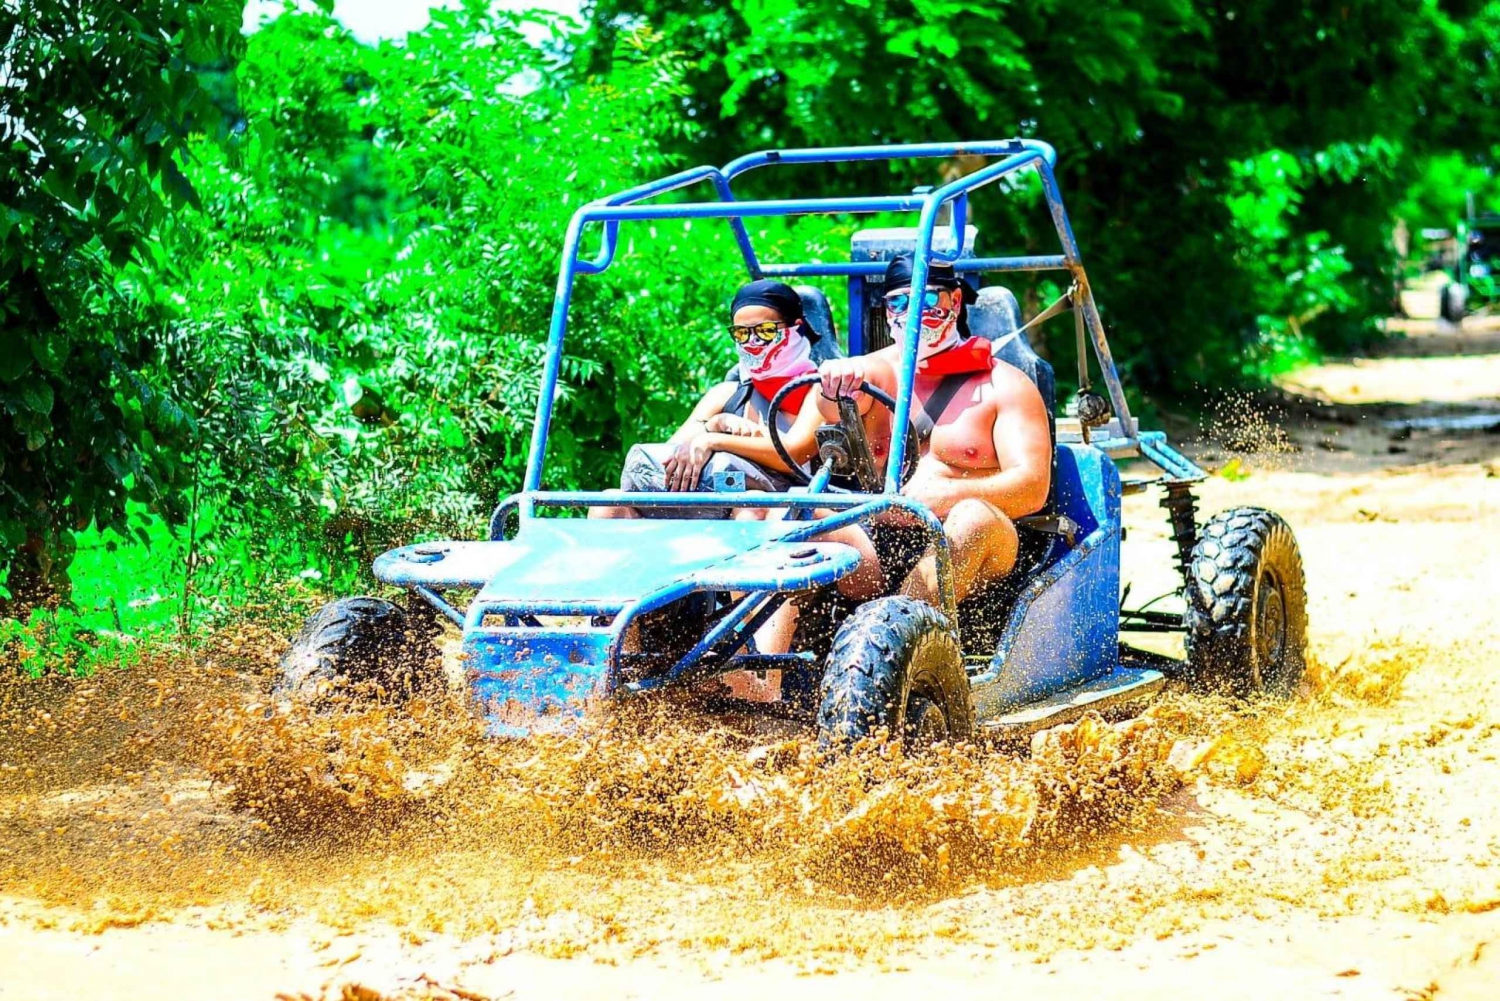 From Punta Cana: Buggy tour for 2 people